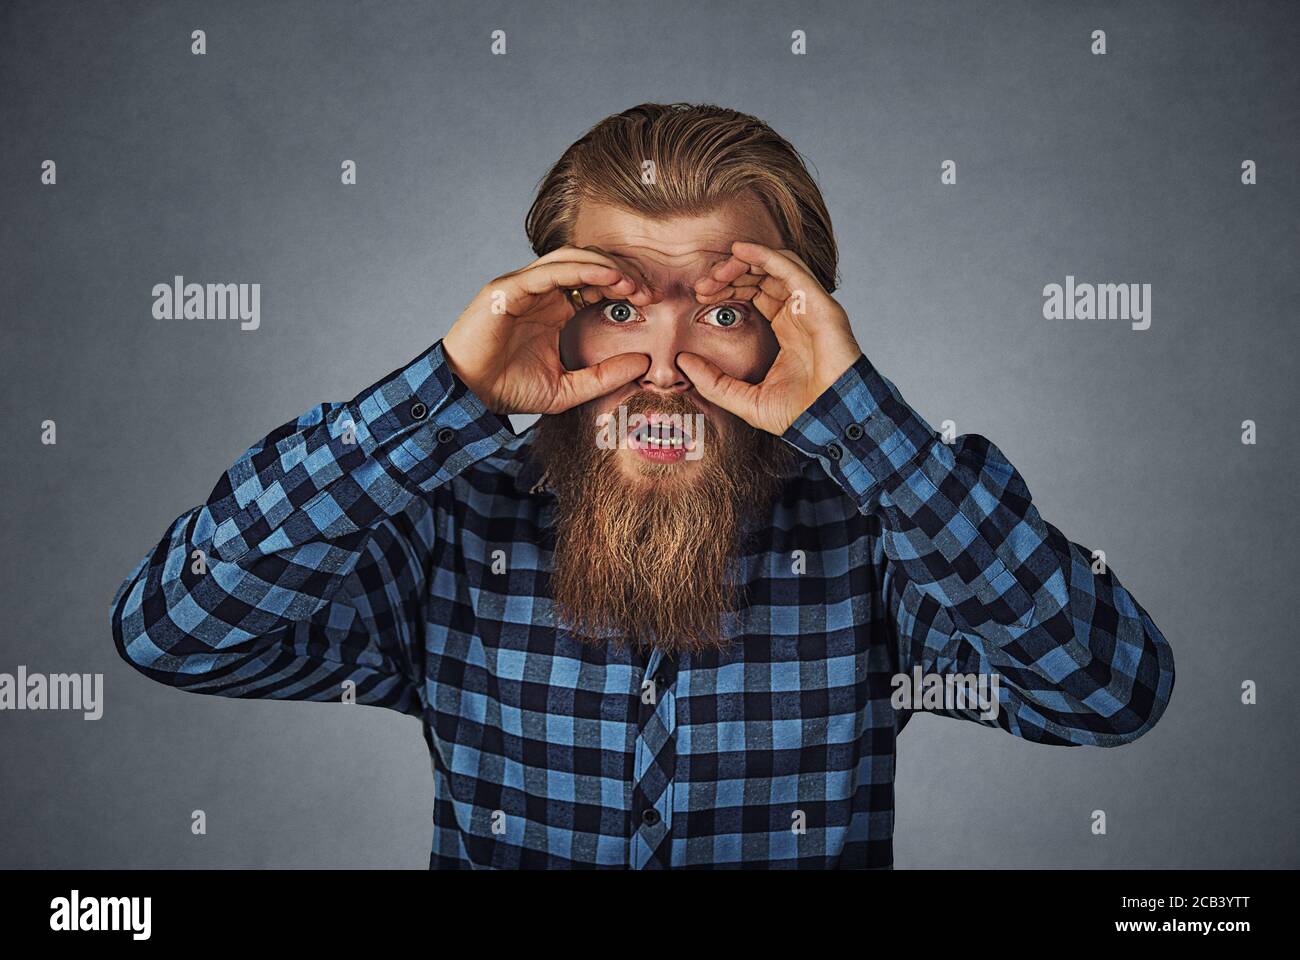 Closeup portrait young stunned curious man, peeking looking through fingers like binoculars searching something future forecast. Hipster male with bea Stock Photo